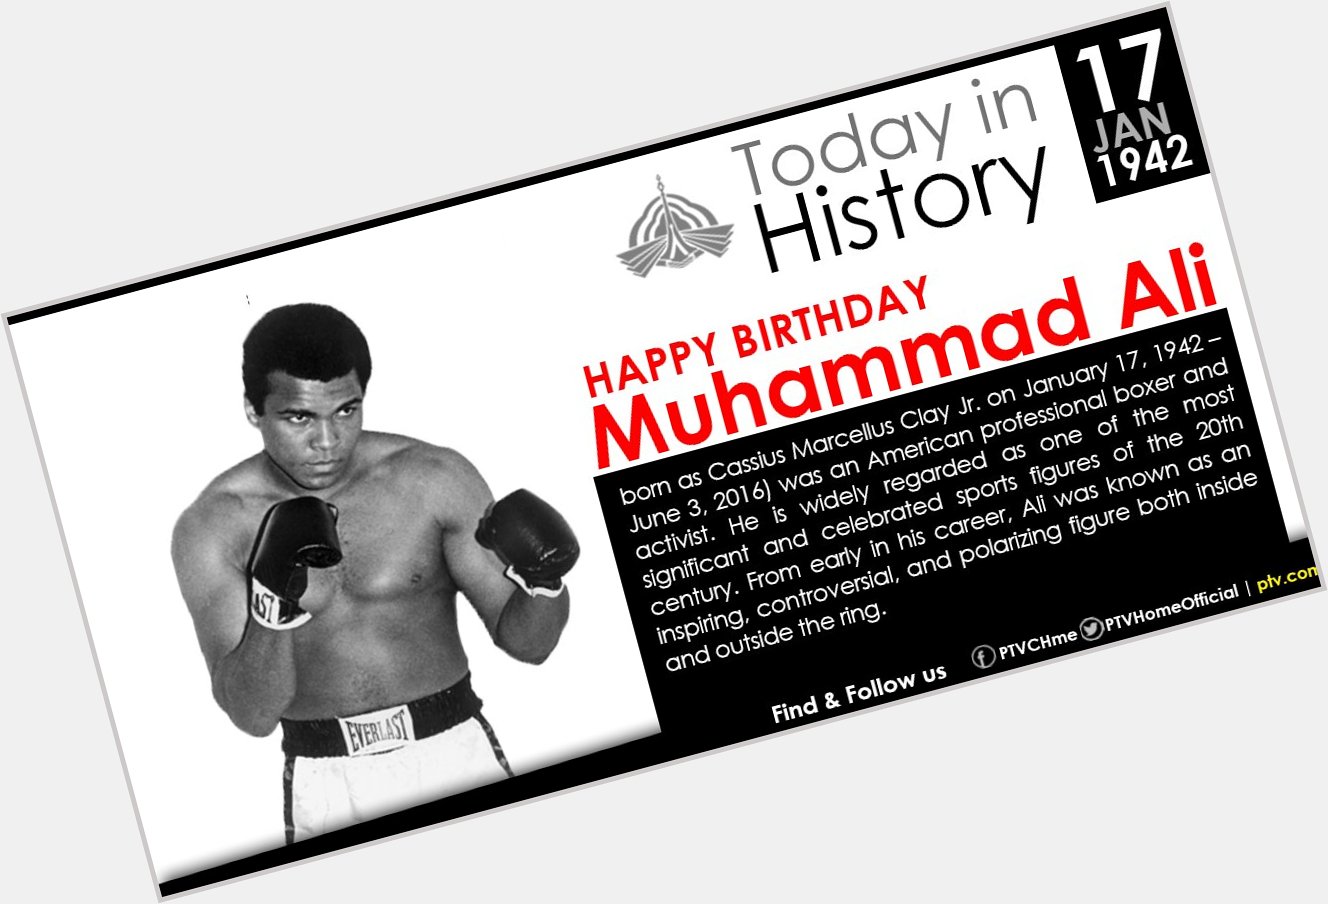 Celebrating a great boxer, social activist and role model
Happy Birthday Muhammad Ali   